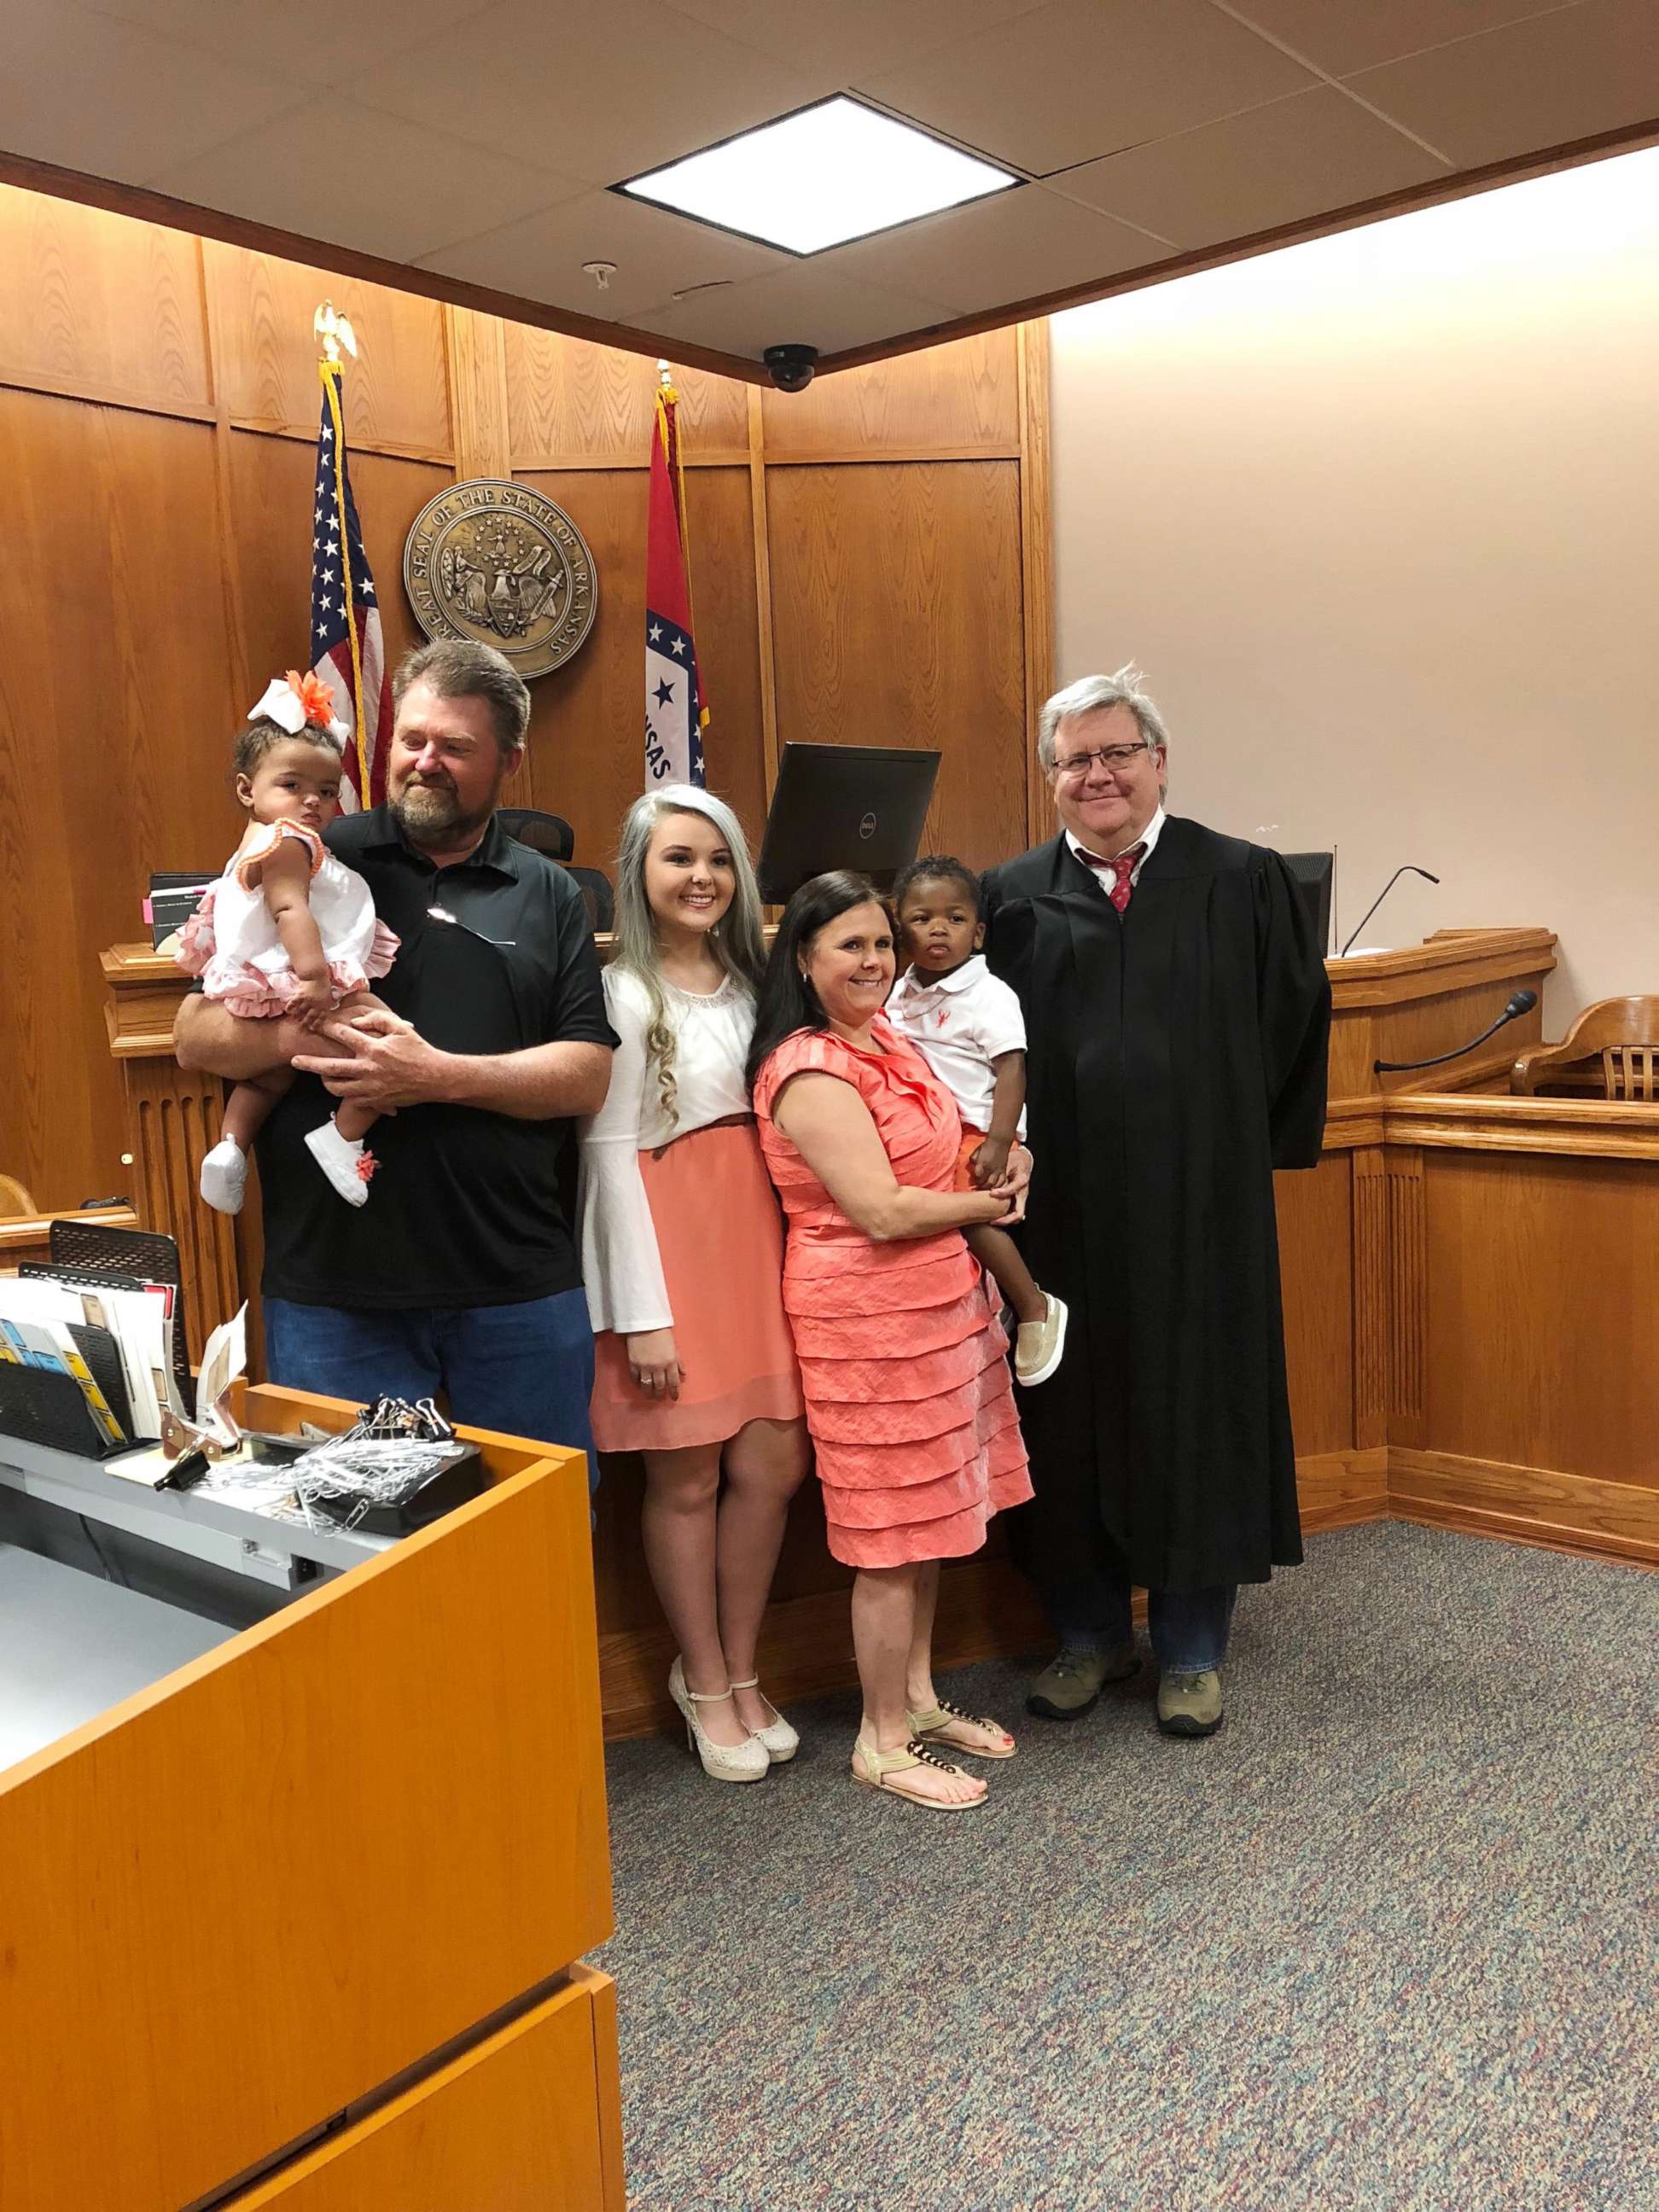 PHOTO: In April, Michael and Terri Hawthorn of Hot Springs, Arkansas, adopted two siblings Haizlee, 1, and Korgen, 3, months before adopting 7 additional siblings from anothe family.